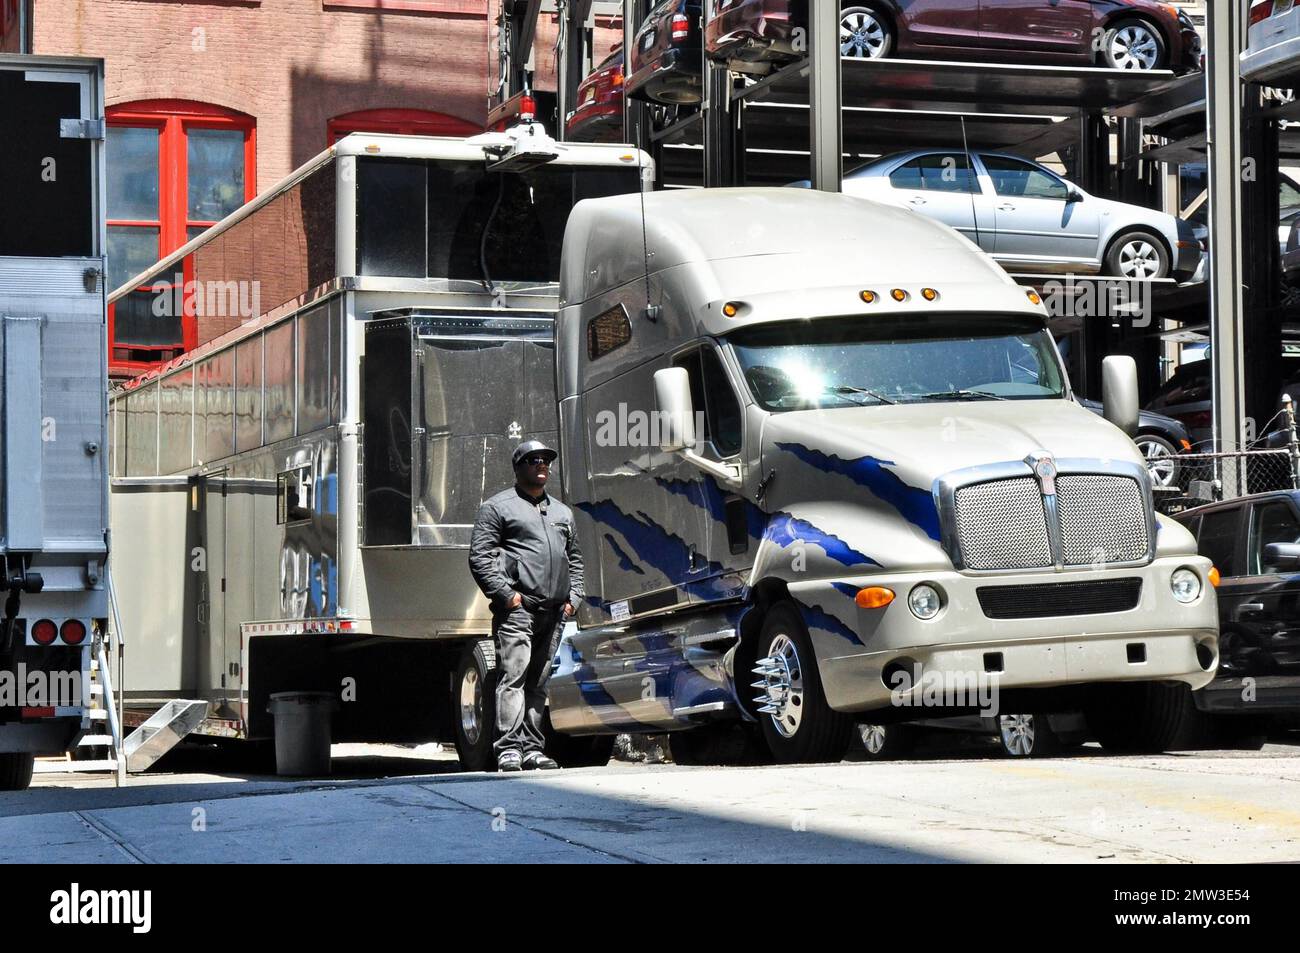 https://c8.alamy.com/comp/2MW3E54/will-smiths-giant-2-million-trailer-has-been-moved-from-the-soho-neighborhood-where-the-actor-is-filming-men-in-black-3-after-reported-complaints-from-neighborhood-residents-about-it-blocking-streets-and-ruining-their-views-the-trailer-was-relocated-to-this-parking-area-nearby-the-giant-trailer-reportedly-holds-1150-squre-feet-and-features-2-bedrooms-and-2-bathrooms-along-with-a-full-kitchen-with-granite-and-italian-cherry-wood-the-two-story-trailer-also-features-a-bar-and-an-office-big-enough-for-30-people-on-the-upper-level-according-to-reports-smith-has-a-separate-55-foot-traile-2MW3E54.jpg